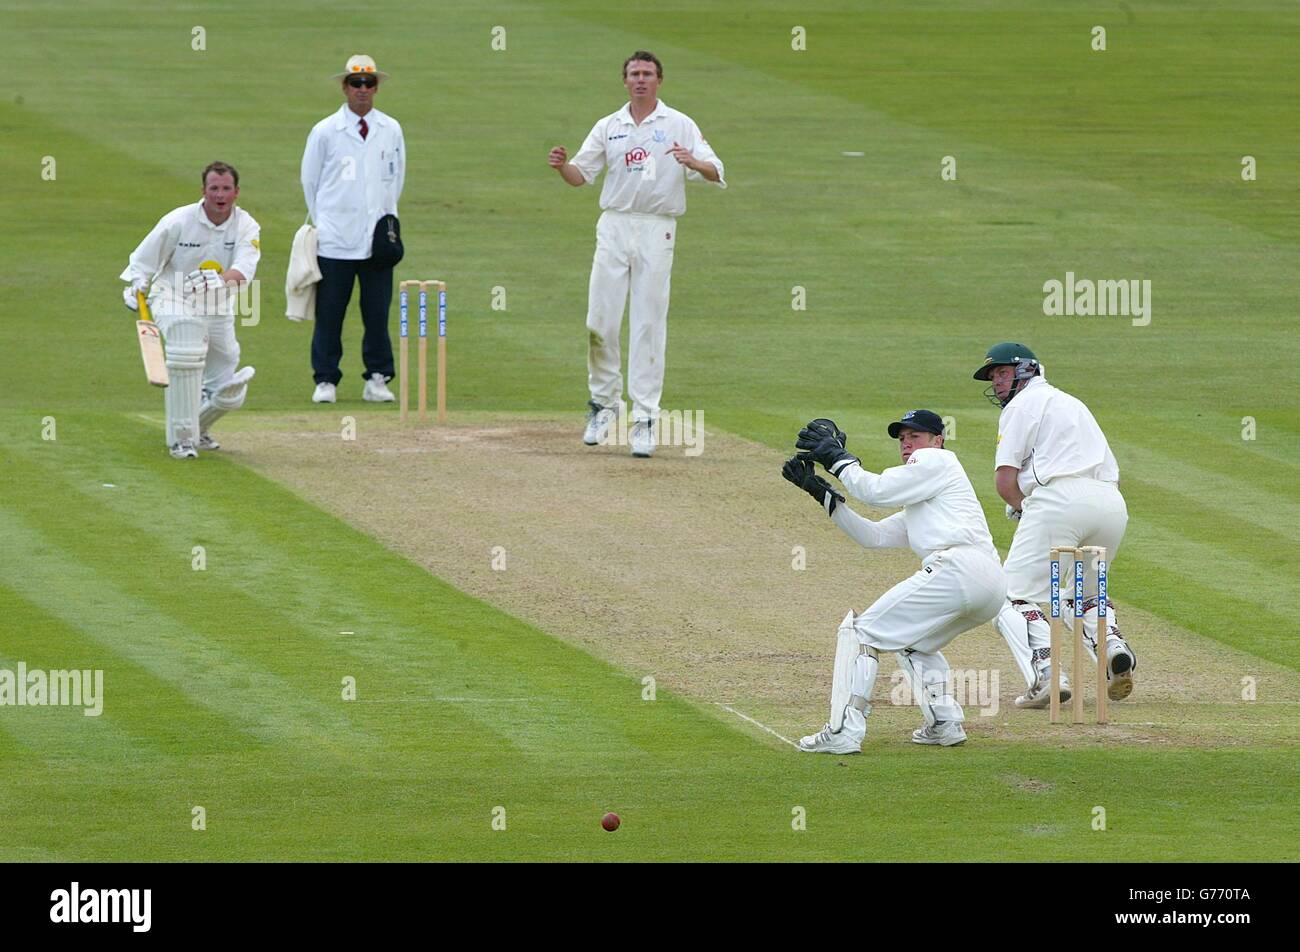 Leicestershire v Sussex. Leicestershire's Trevor Ward watches his shot during the C&G trophy at Grace Road, Leicester. Stock Photo